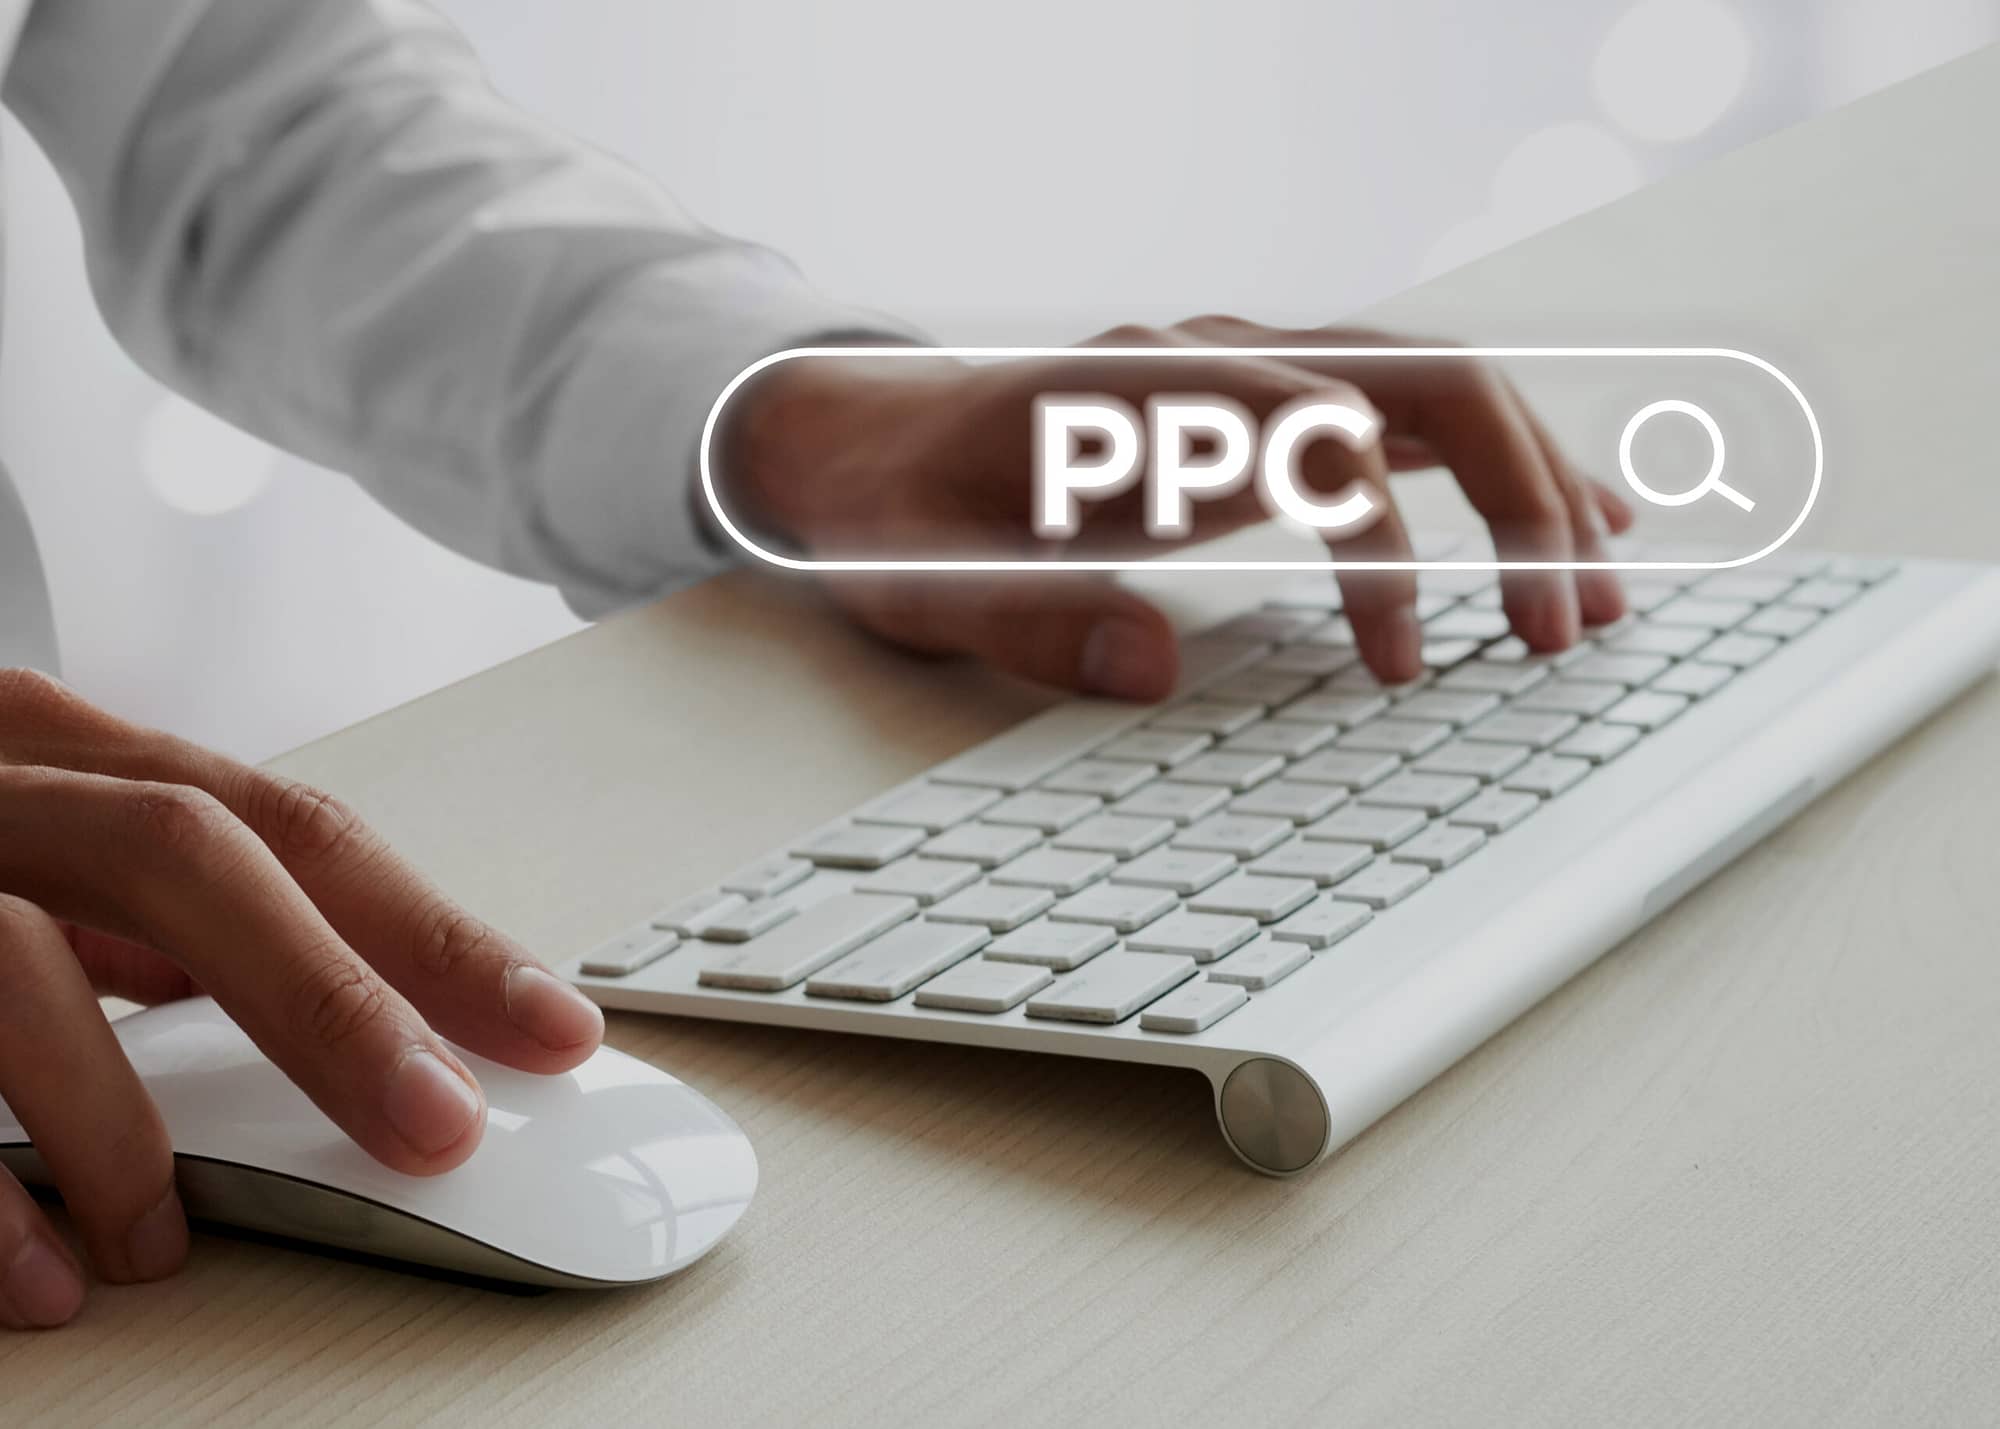 PPC pay per click, internet marketing and link building abstraction